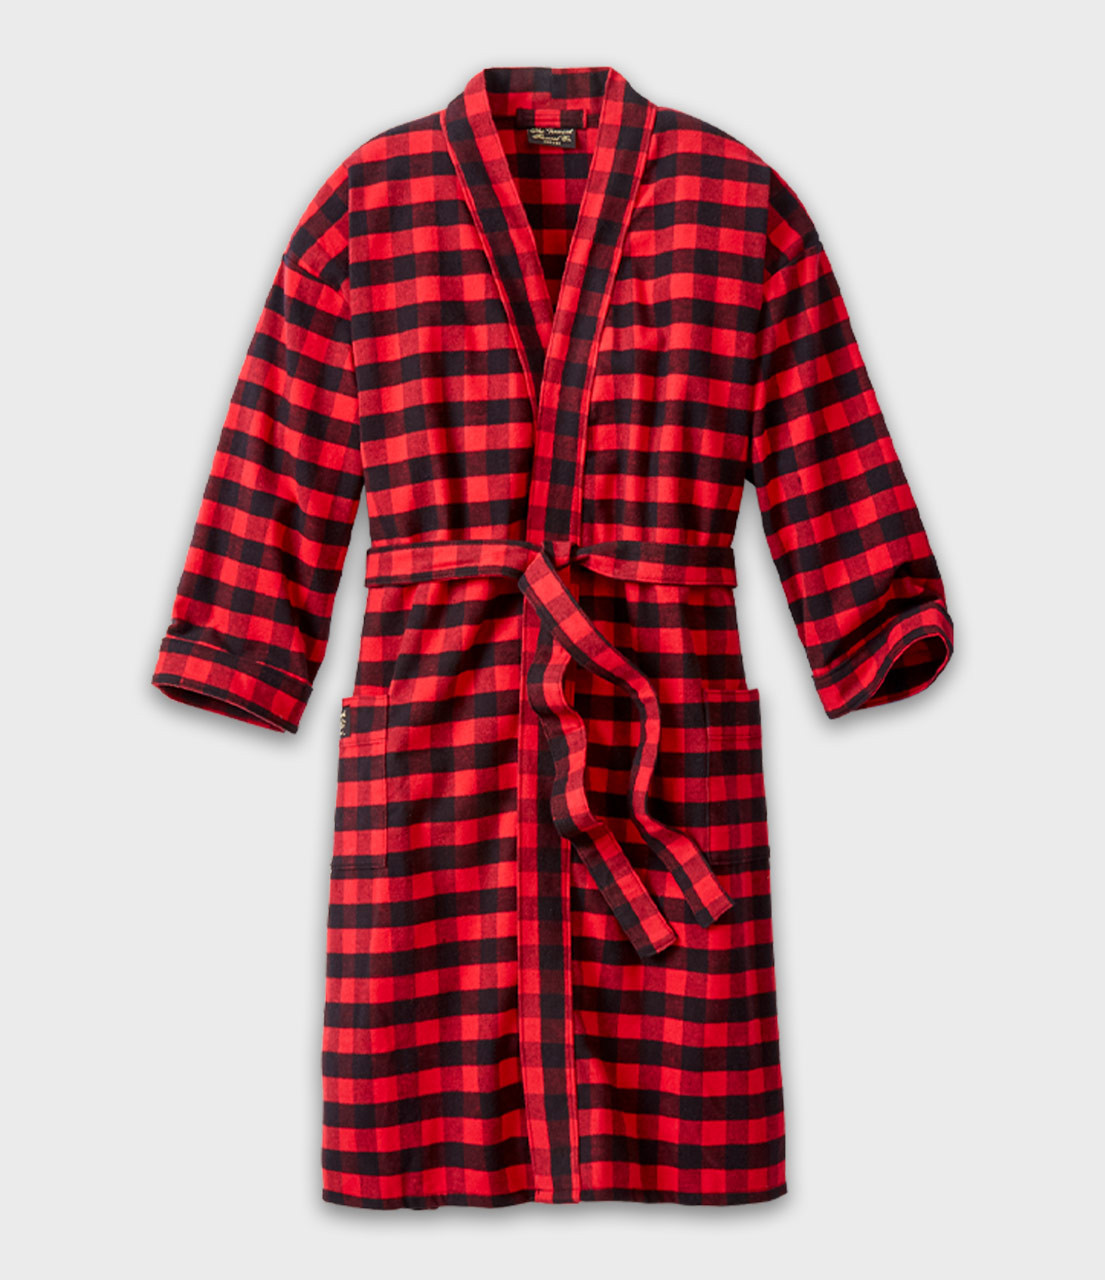 ZFLL Winter Robes,Thicken Warm Couple Style Flannel Robe Winter Long Sleeve  Bathrobe Sexy V-Neck Women Men Nightgown Lounge